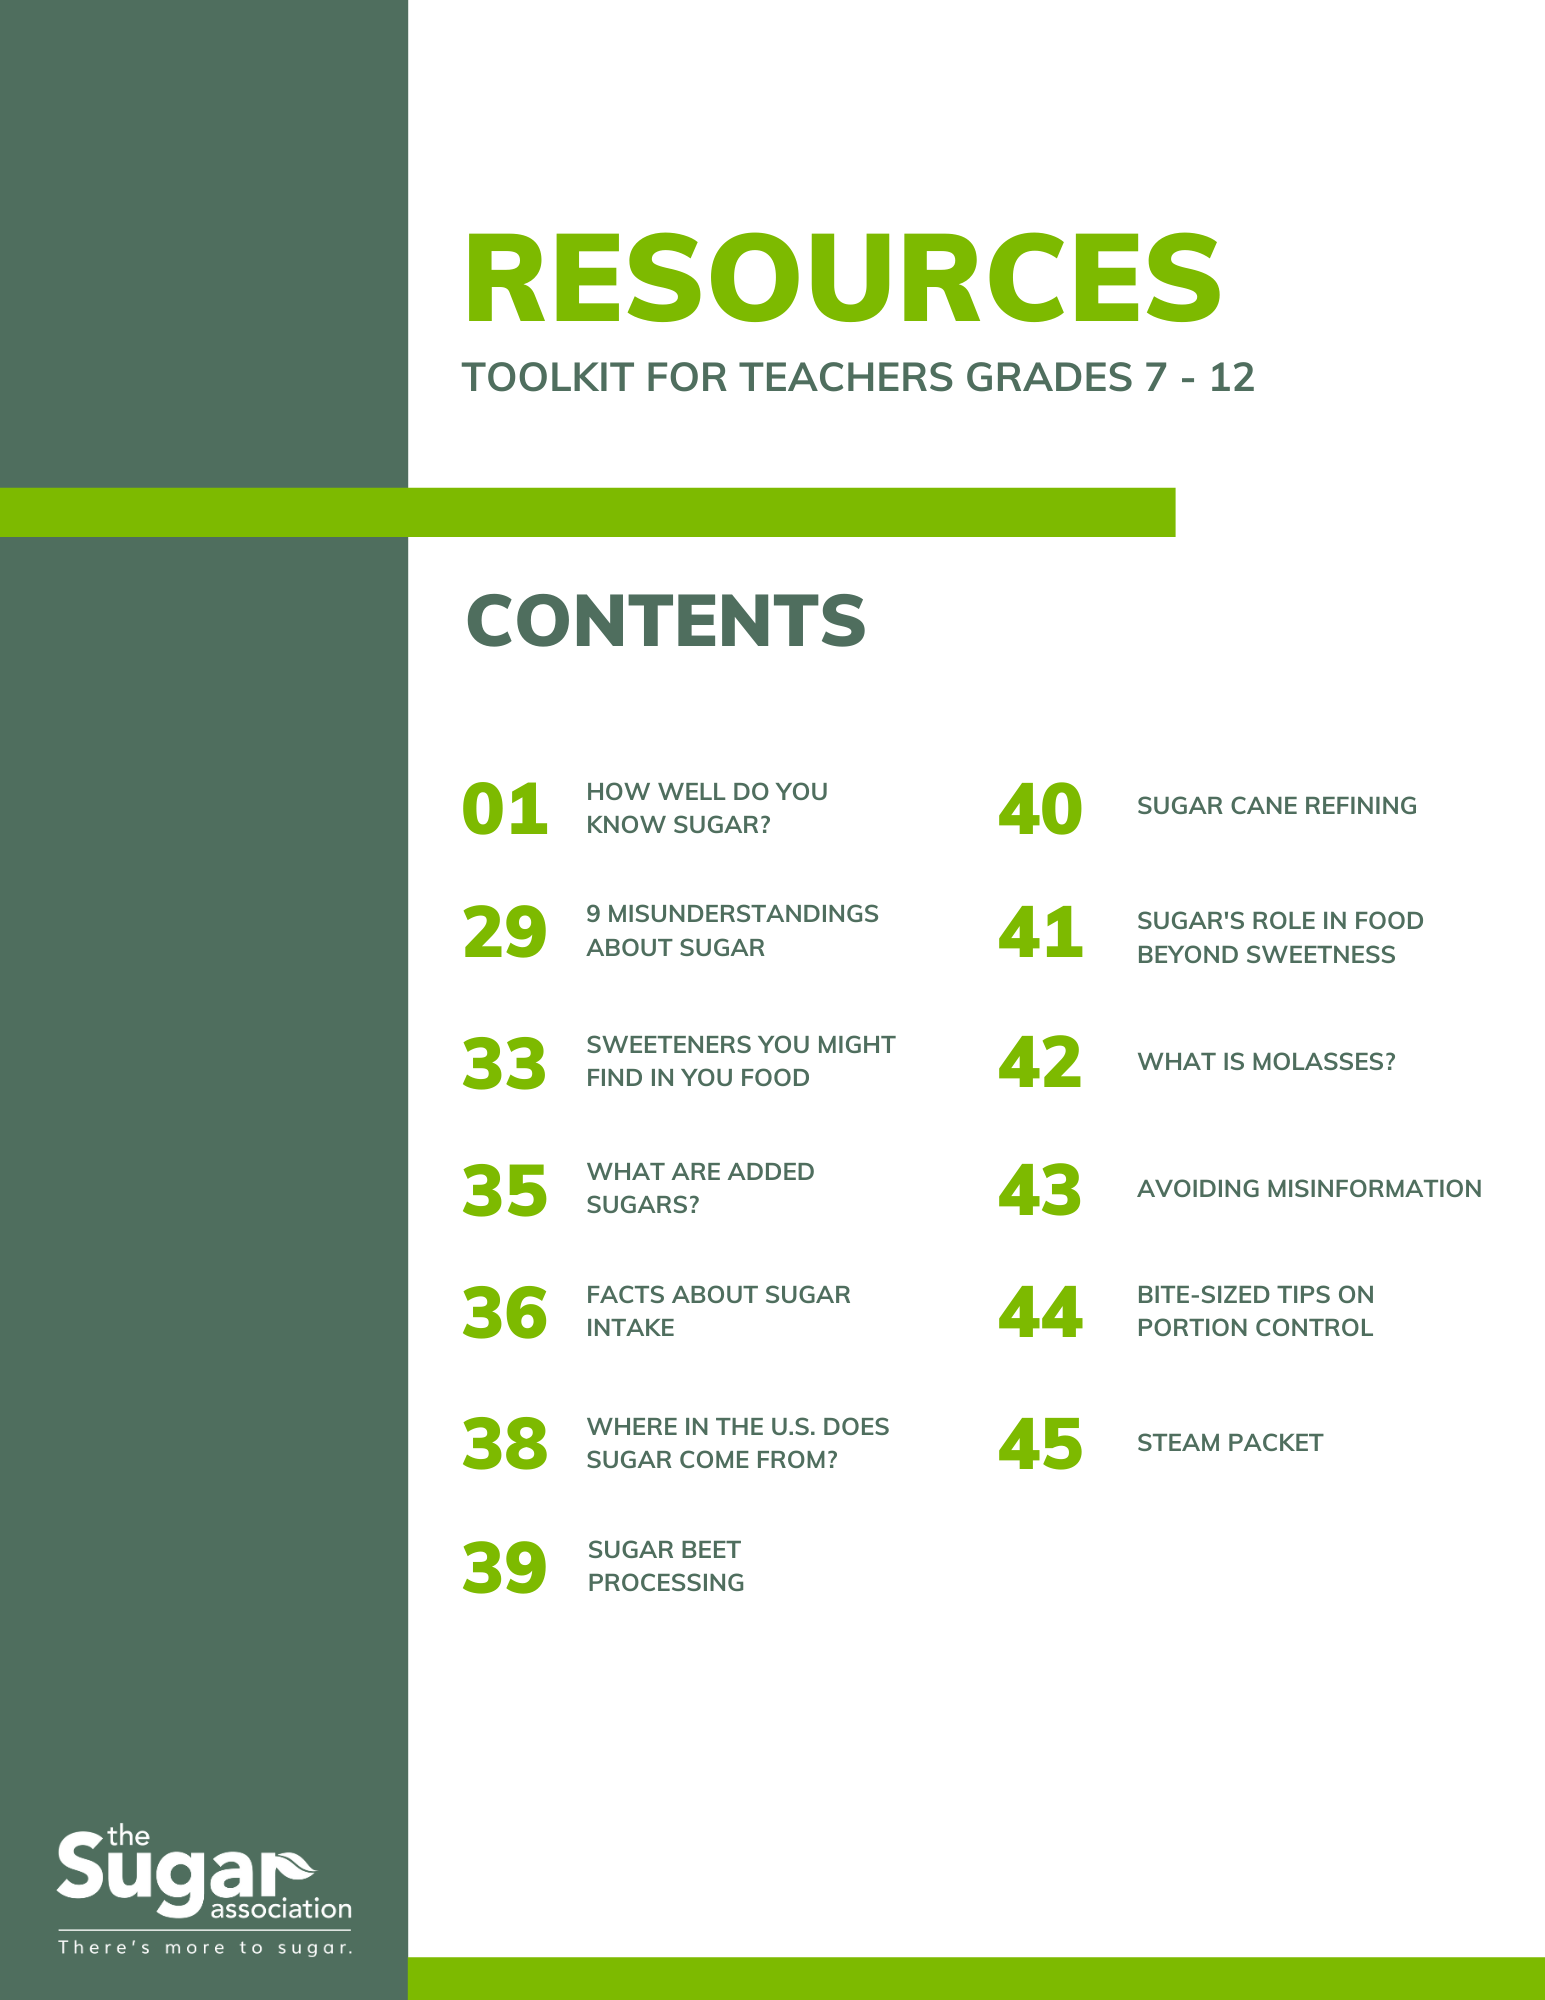 Resource Toolkit for Grades 7-12